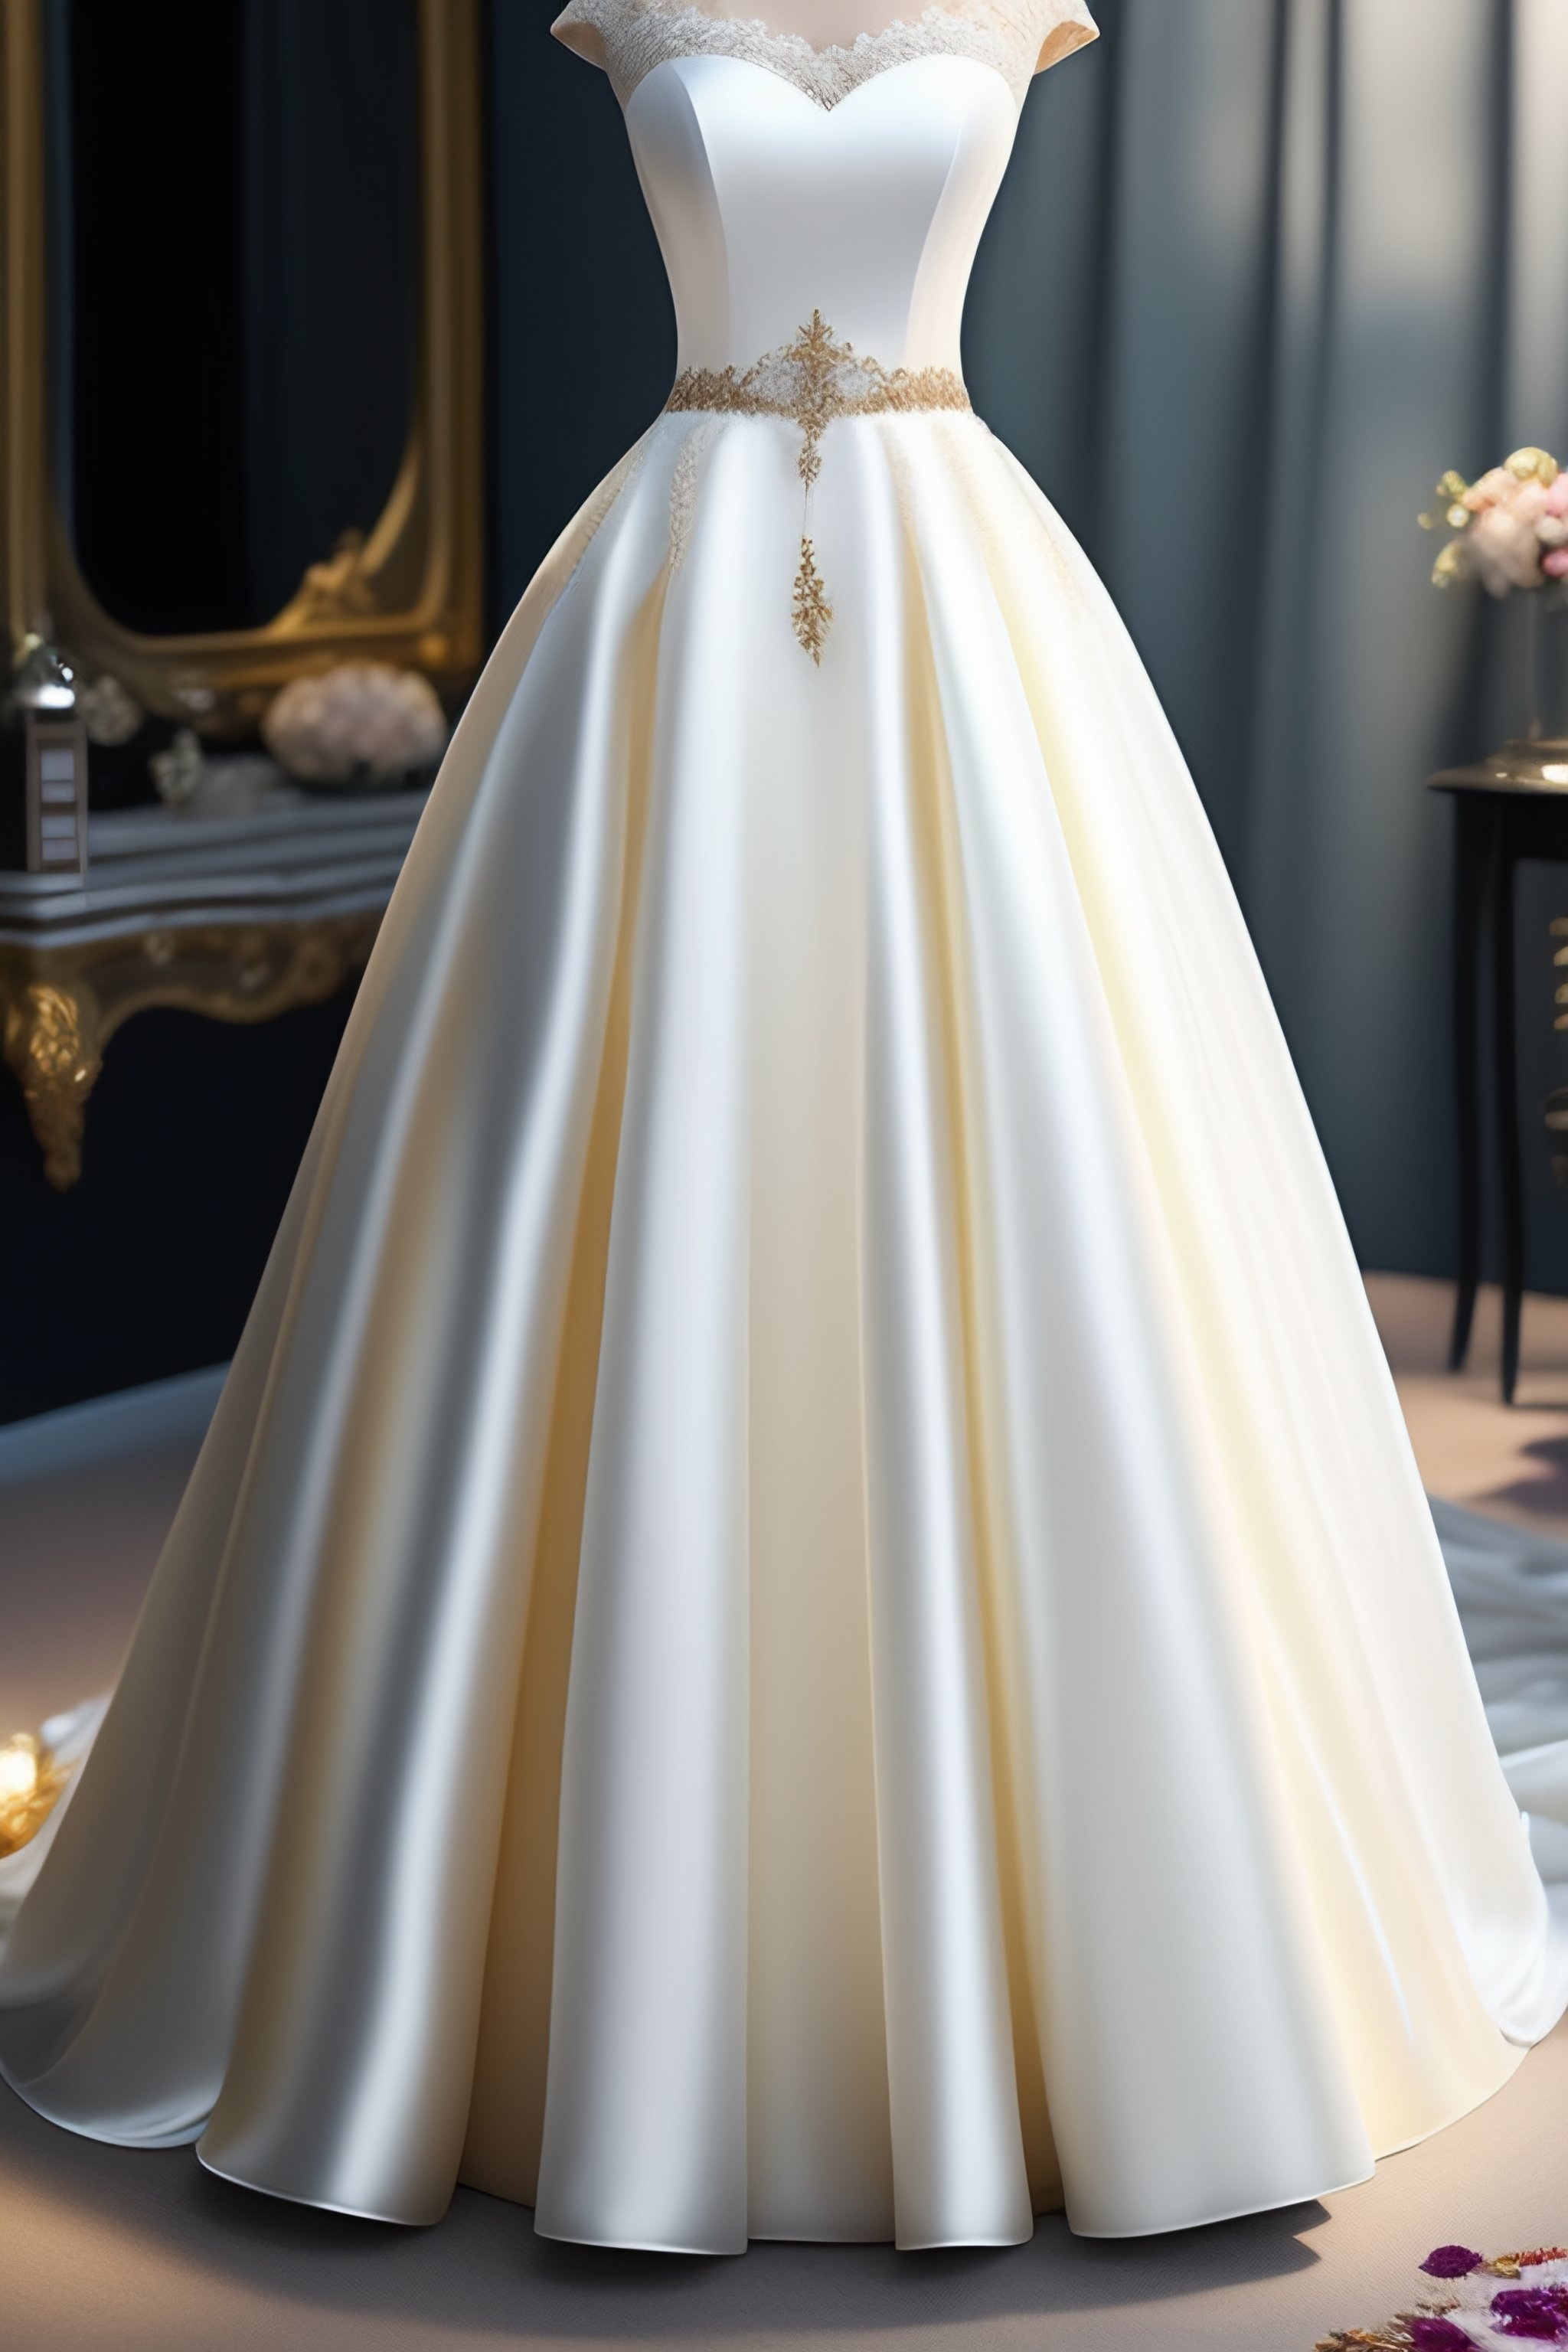 Lexica - The most beautiful white dress design